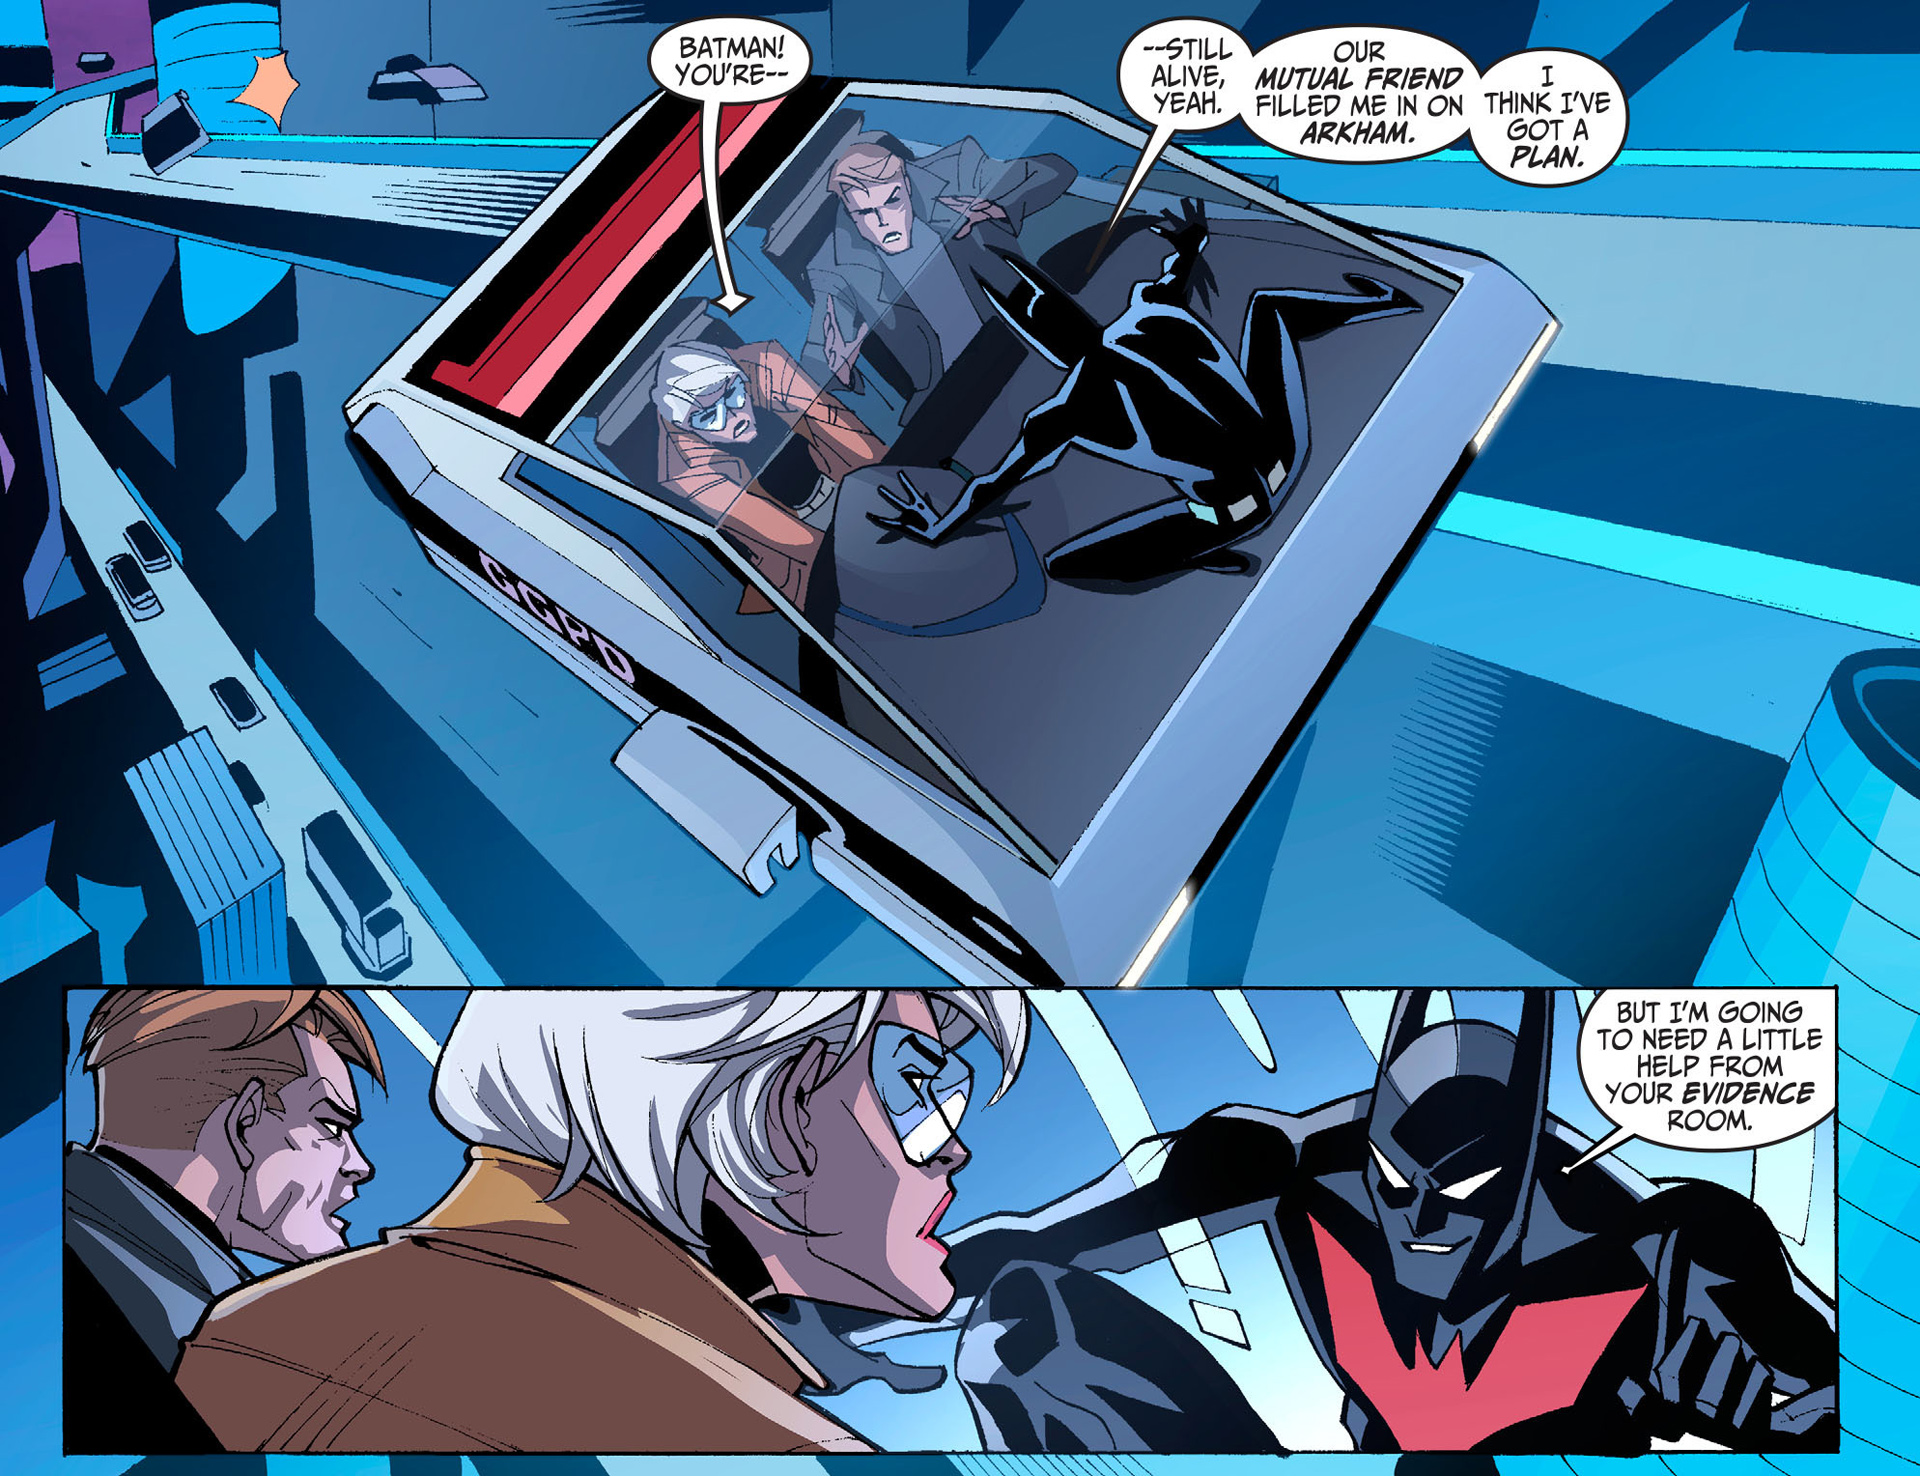 Batman Beyond 2.0 issue 7 - Page 18